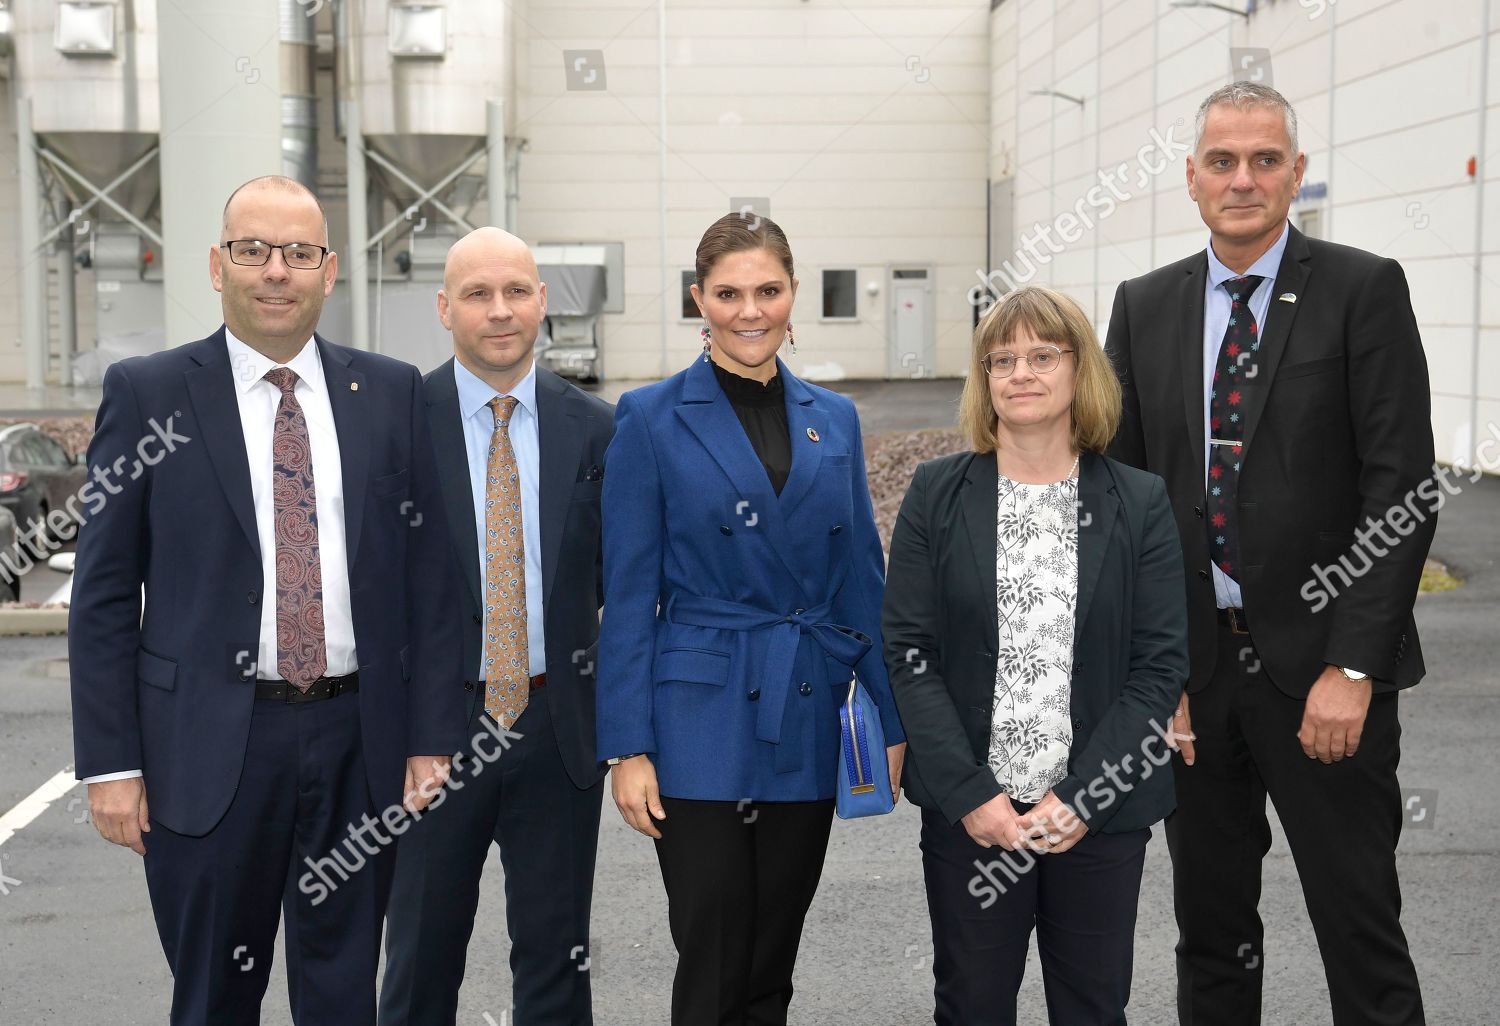 crown-princess-victoria-visits-the-swedish-plastic-recycling-plant-motala-sweden-shutterstock-editorial-10448317a.jpg